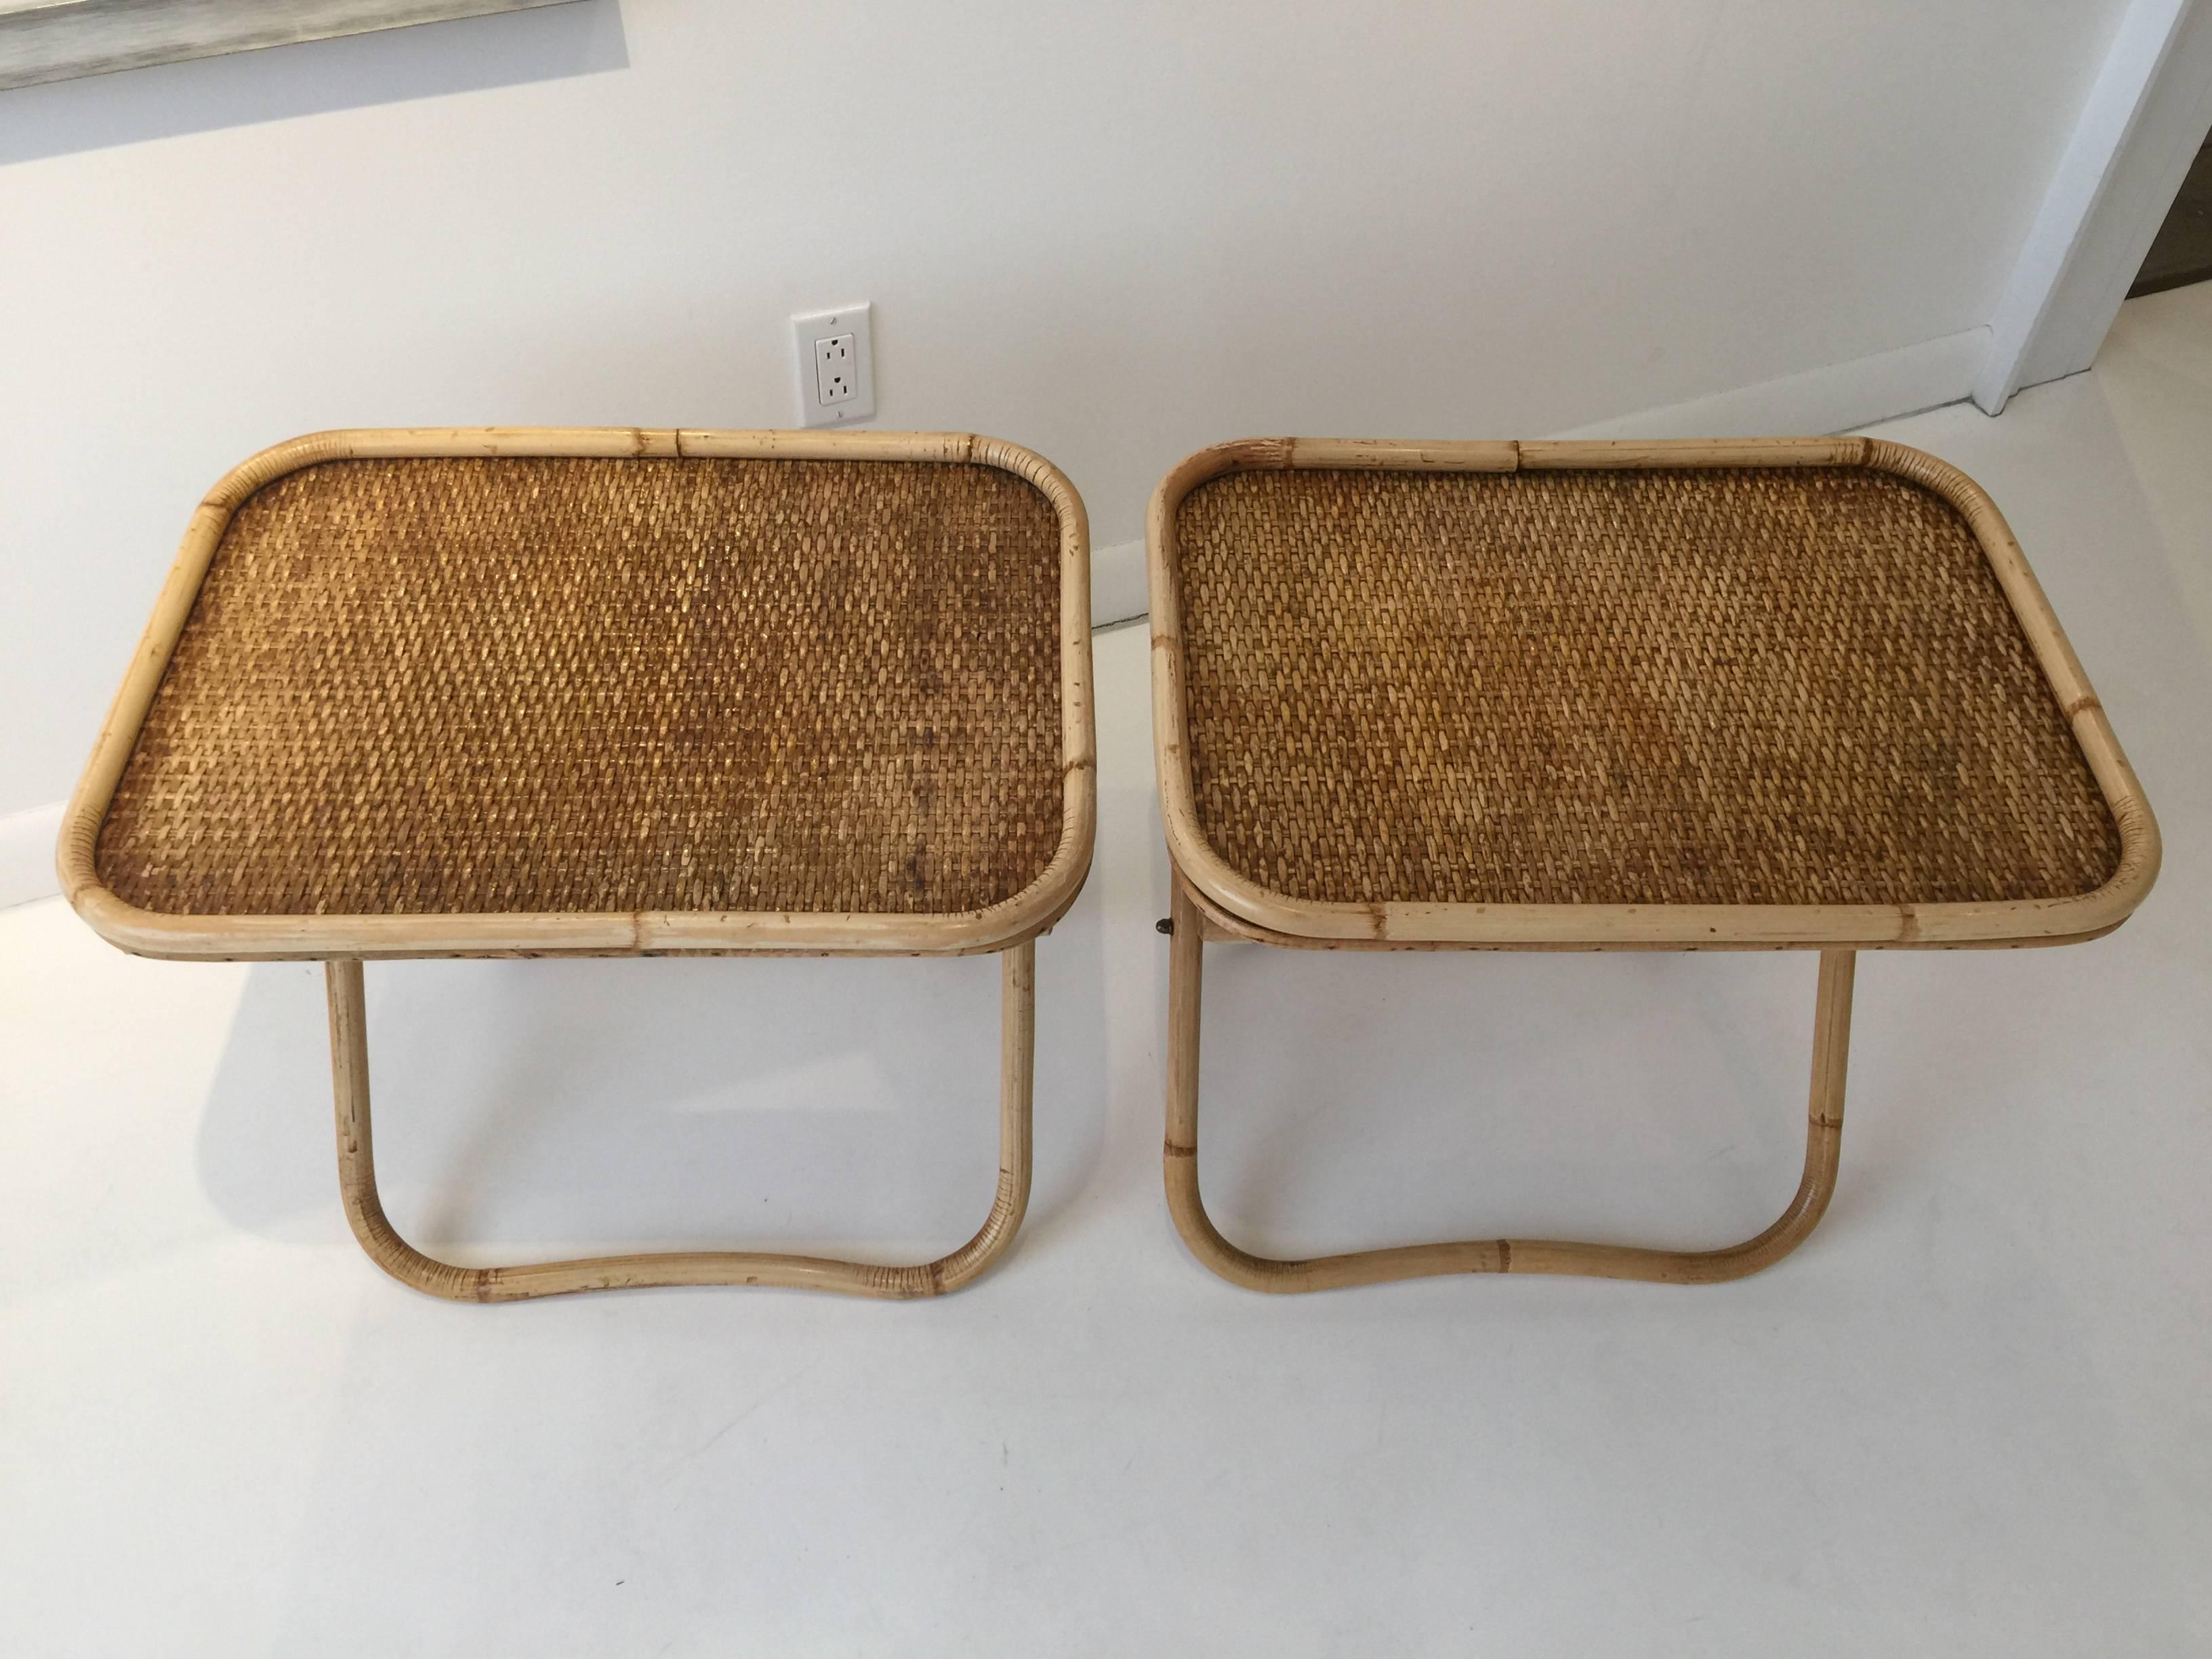 Collapsible side tables in wicker and rattan, designed by Gabriella Crespi in 1970s and sold exclusively through her boutiques. Crespi stopped designing after ten years of a successful furniture design career to become a Buddhist monk. Brass tag on